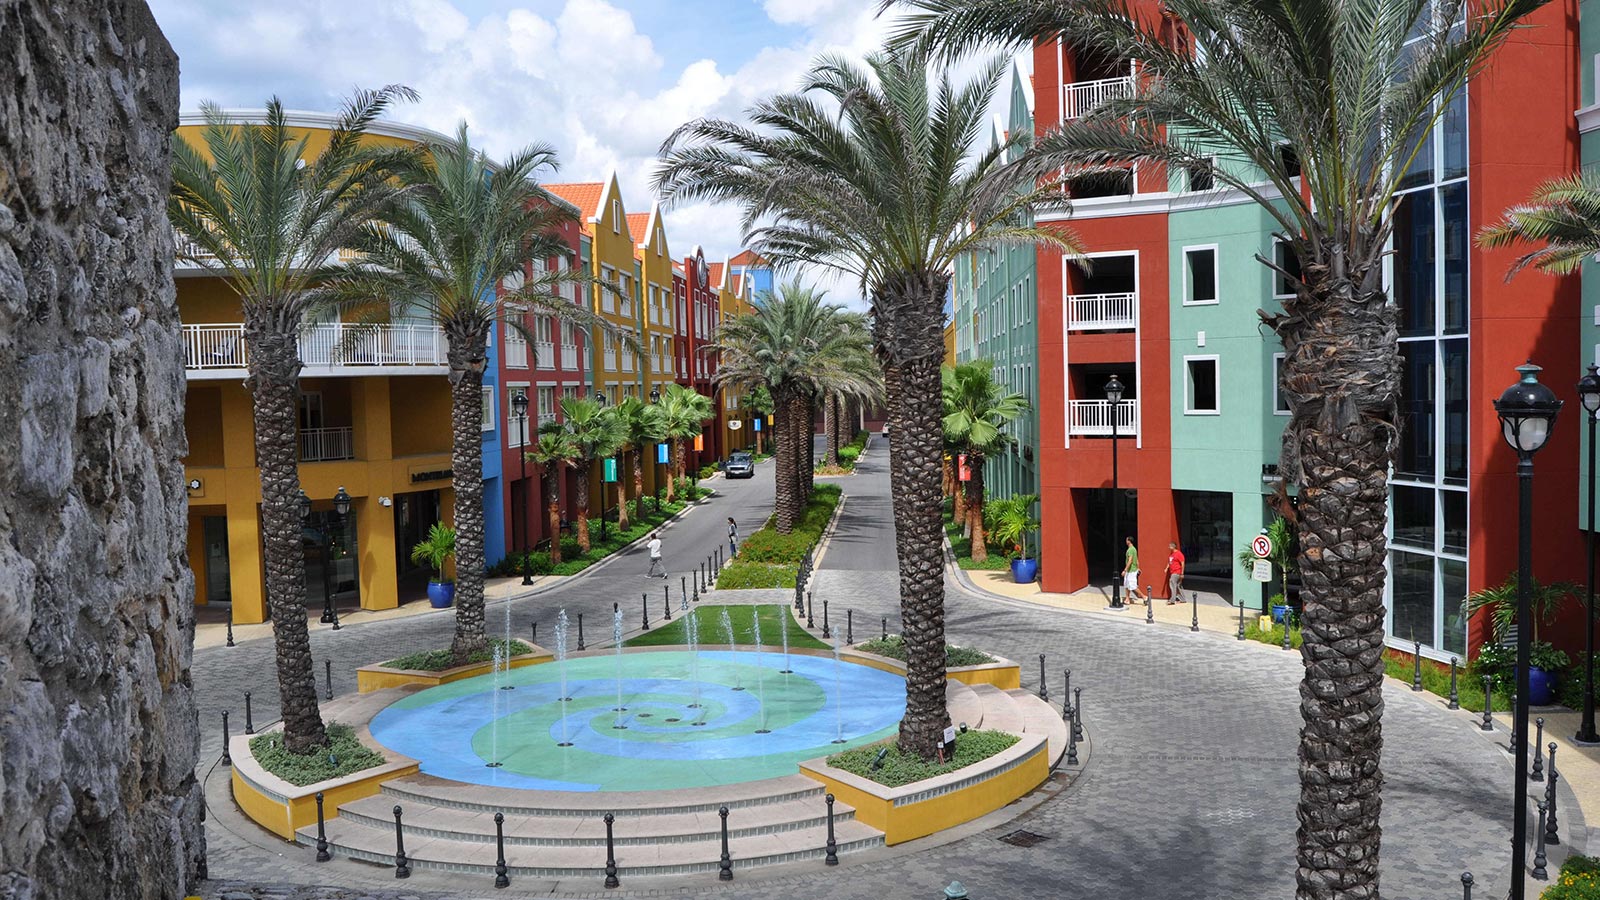 central plaza lined with colorful buildings